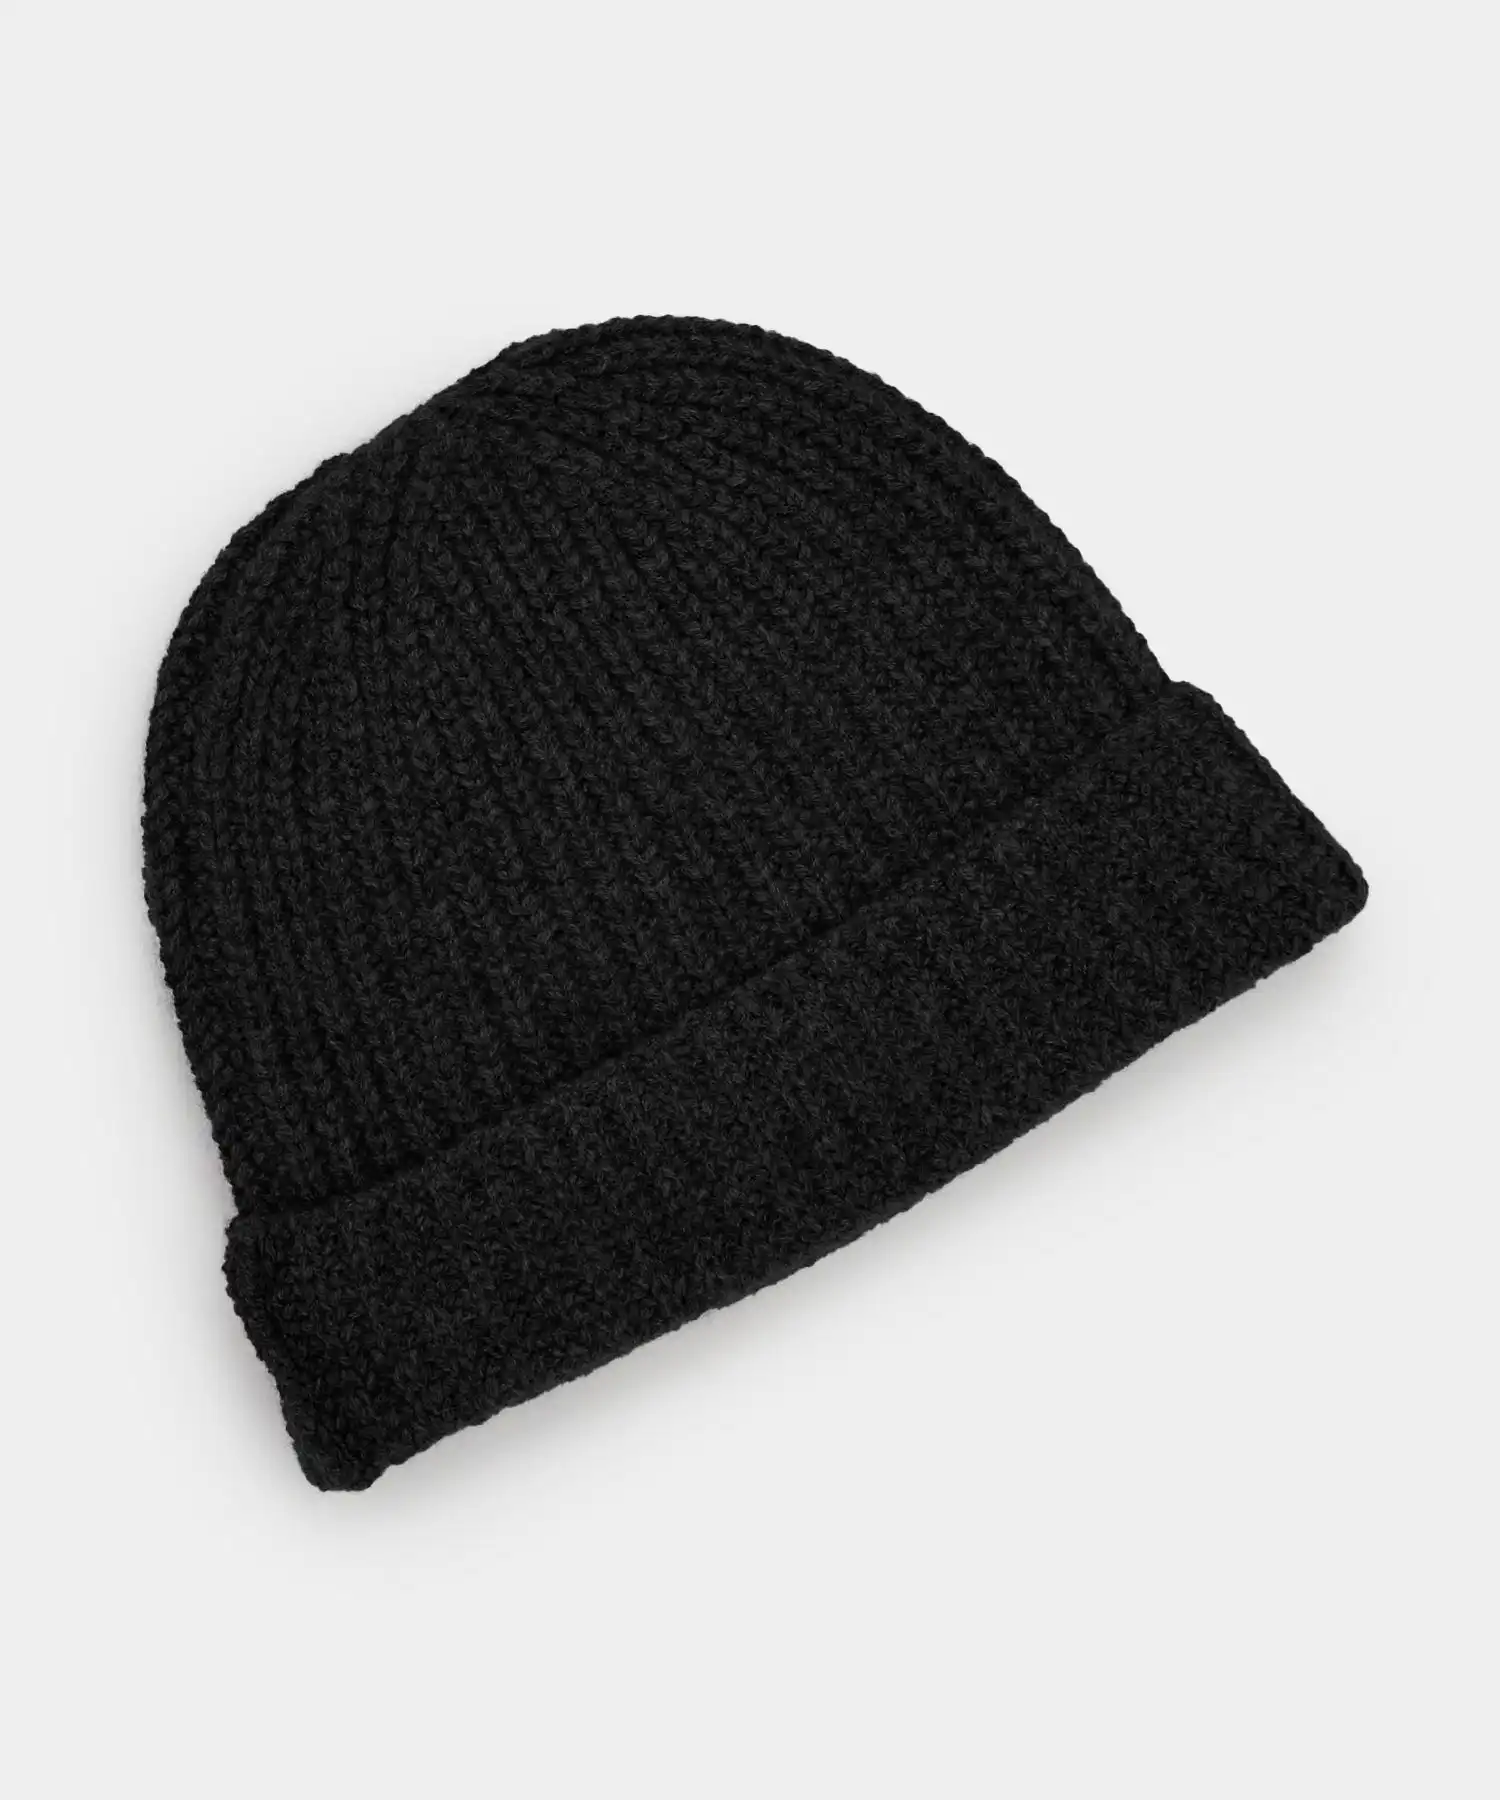 Todd Snyder Italian Recycled Cashmere Beanie